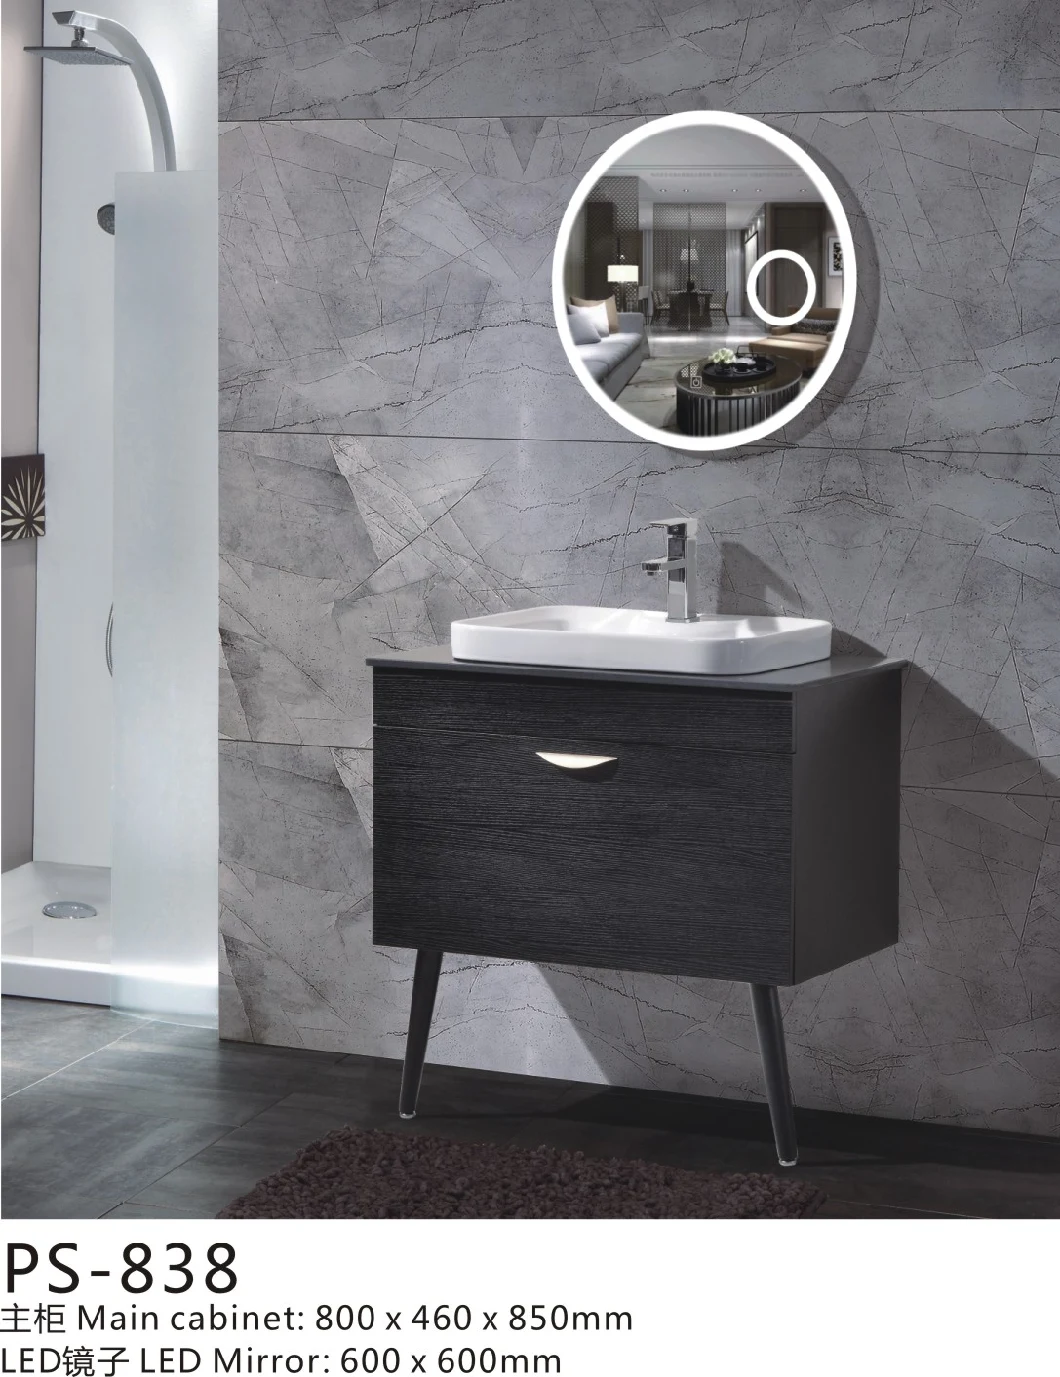 PVC Paint Free Wall Mounted Type Bathroom Cabinet with Black Artificial Stone Top Black Ceramic Basin and LED Mirror